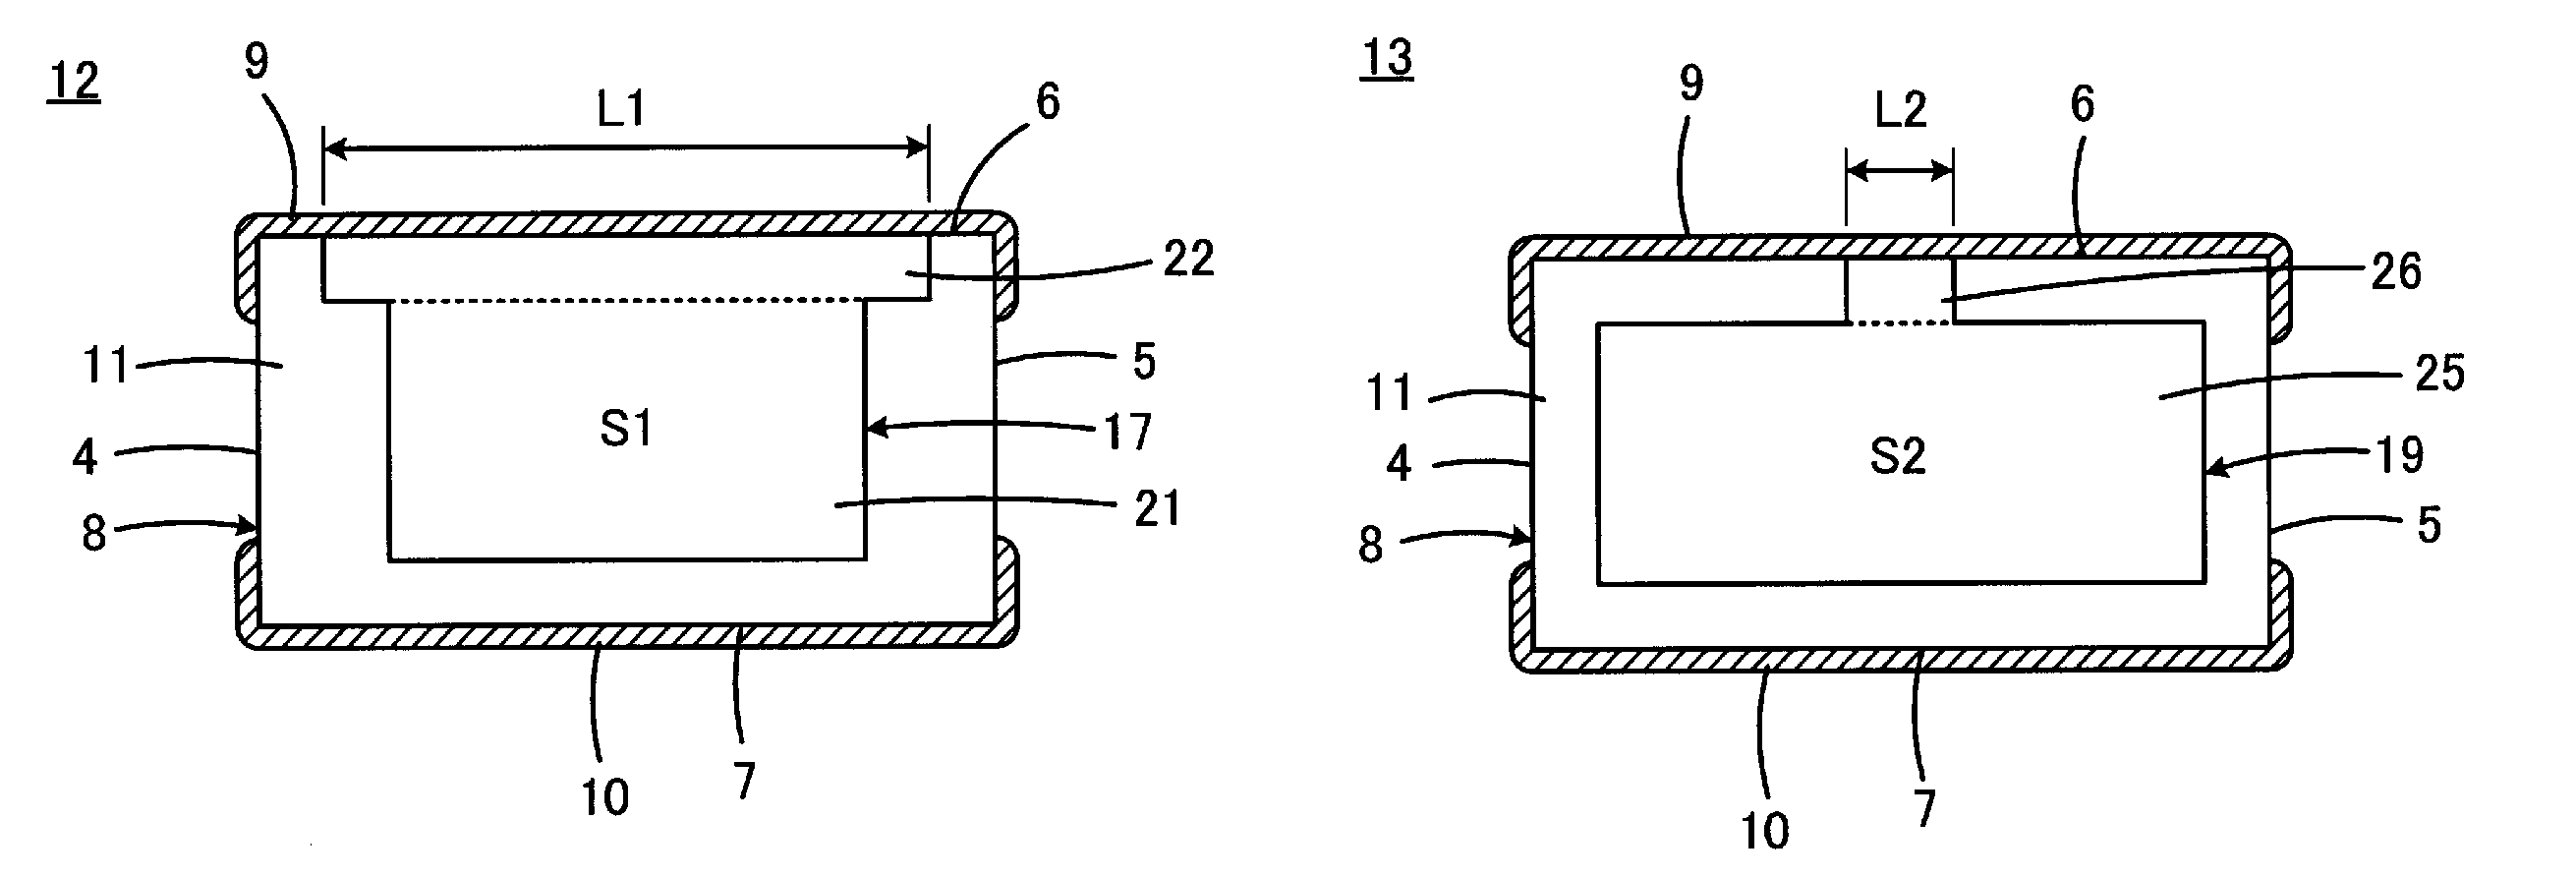 Multilayer capacitor having low ESL and easily controllable ESR